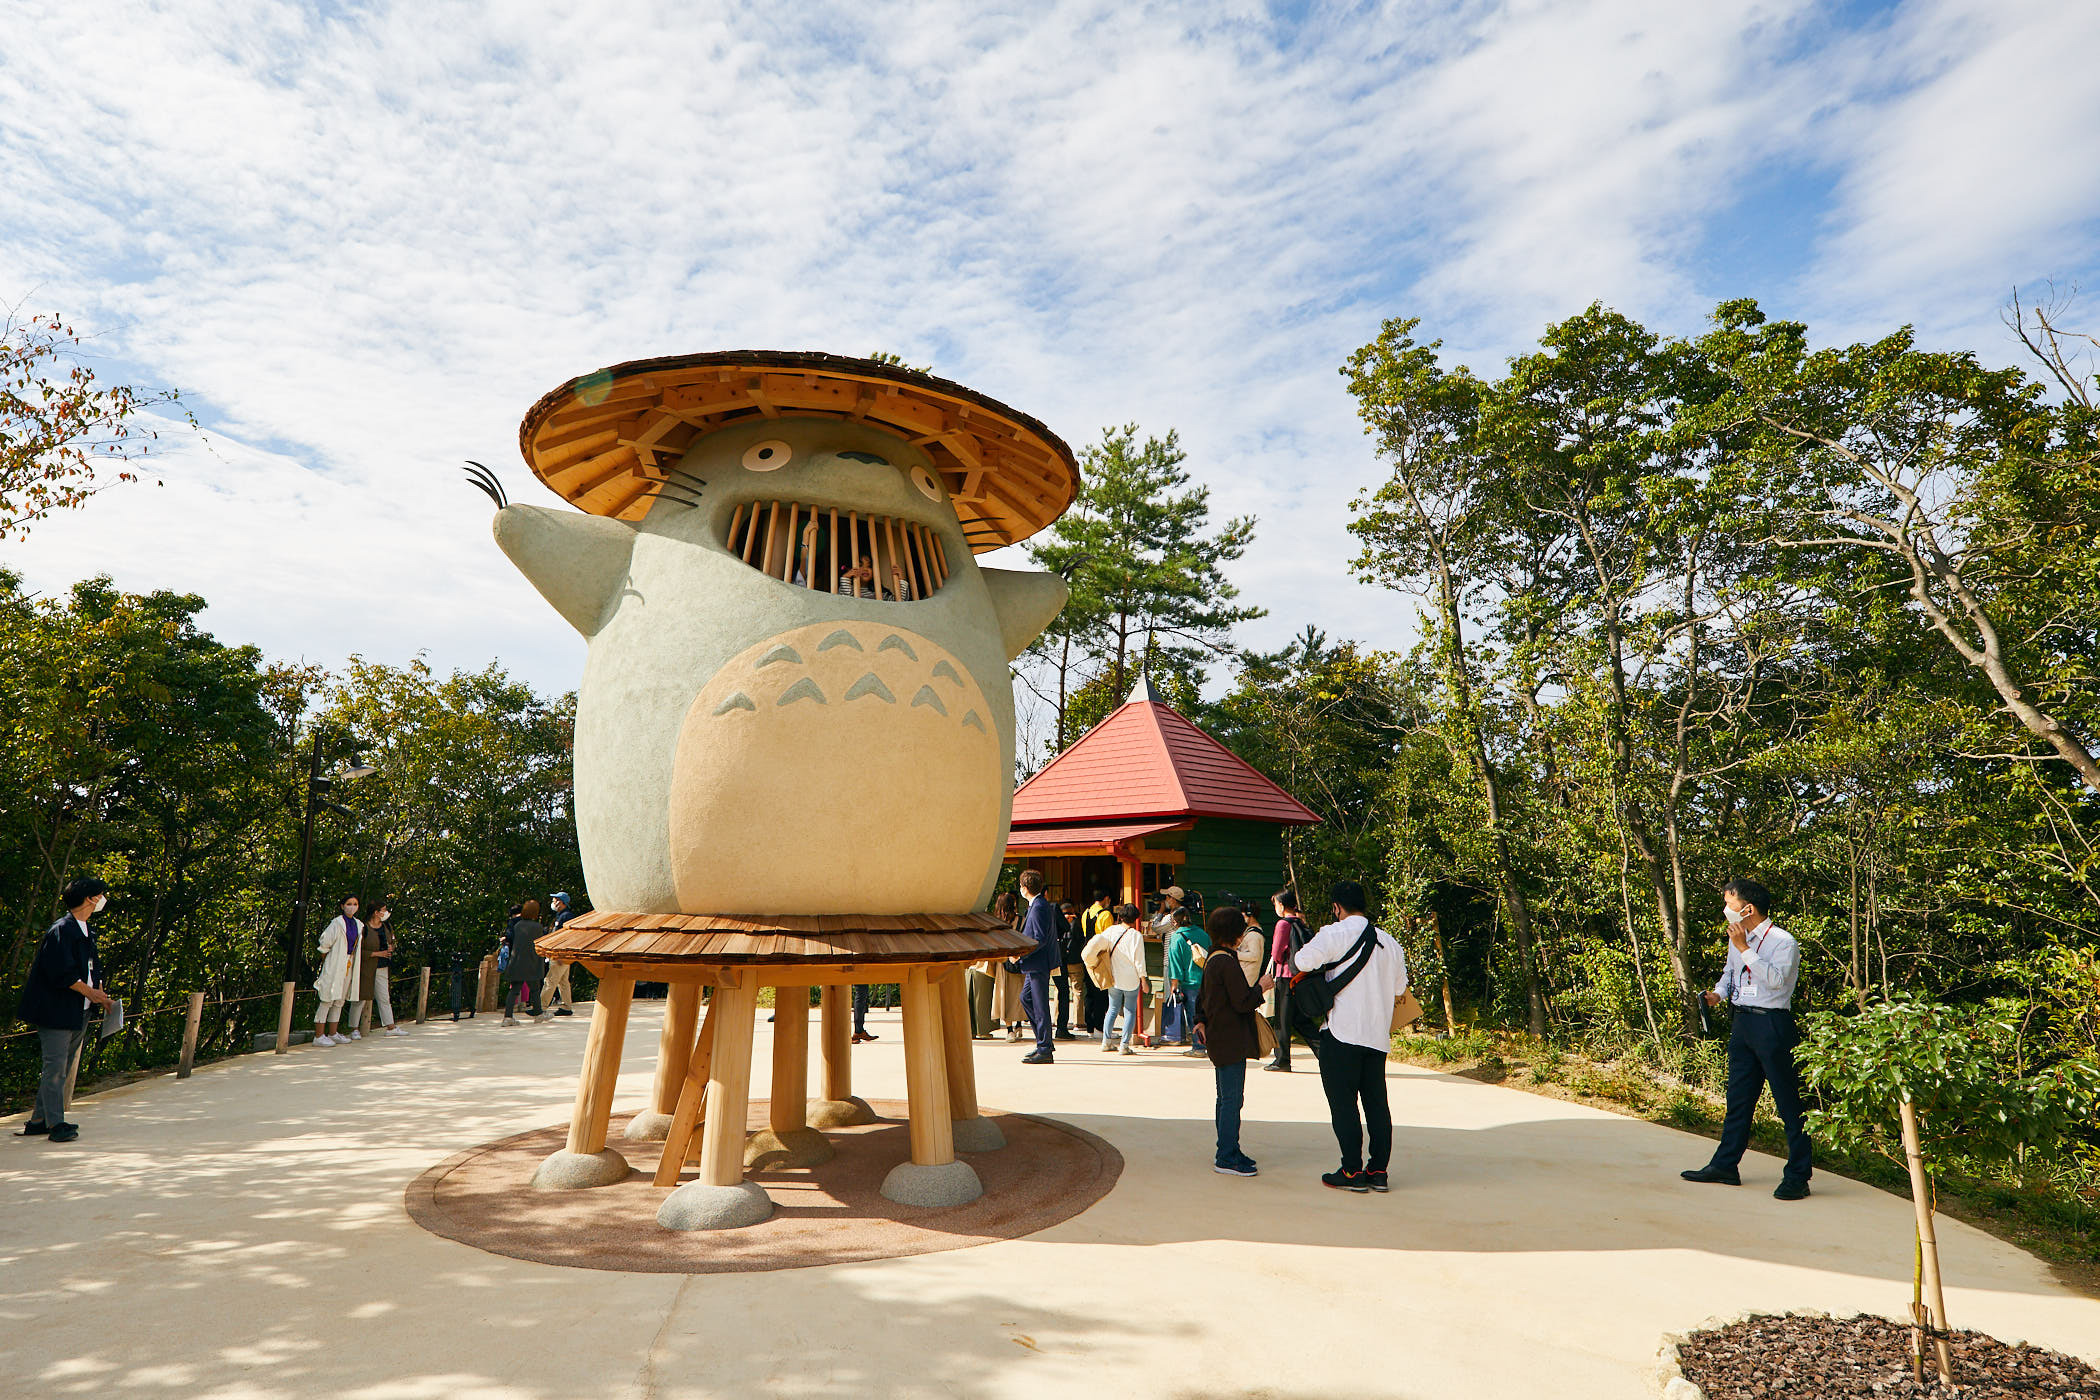 Ghibli Park Guide: Tickets, Getting There, Tips & More